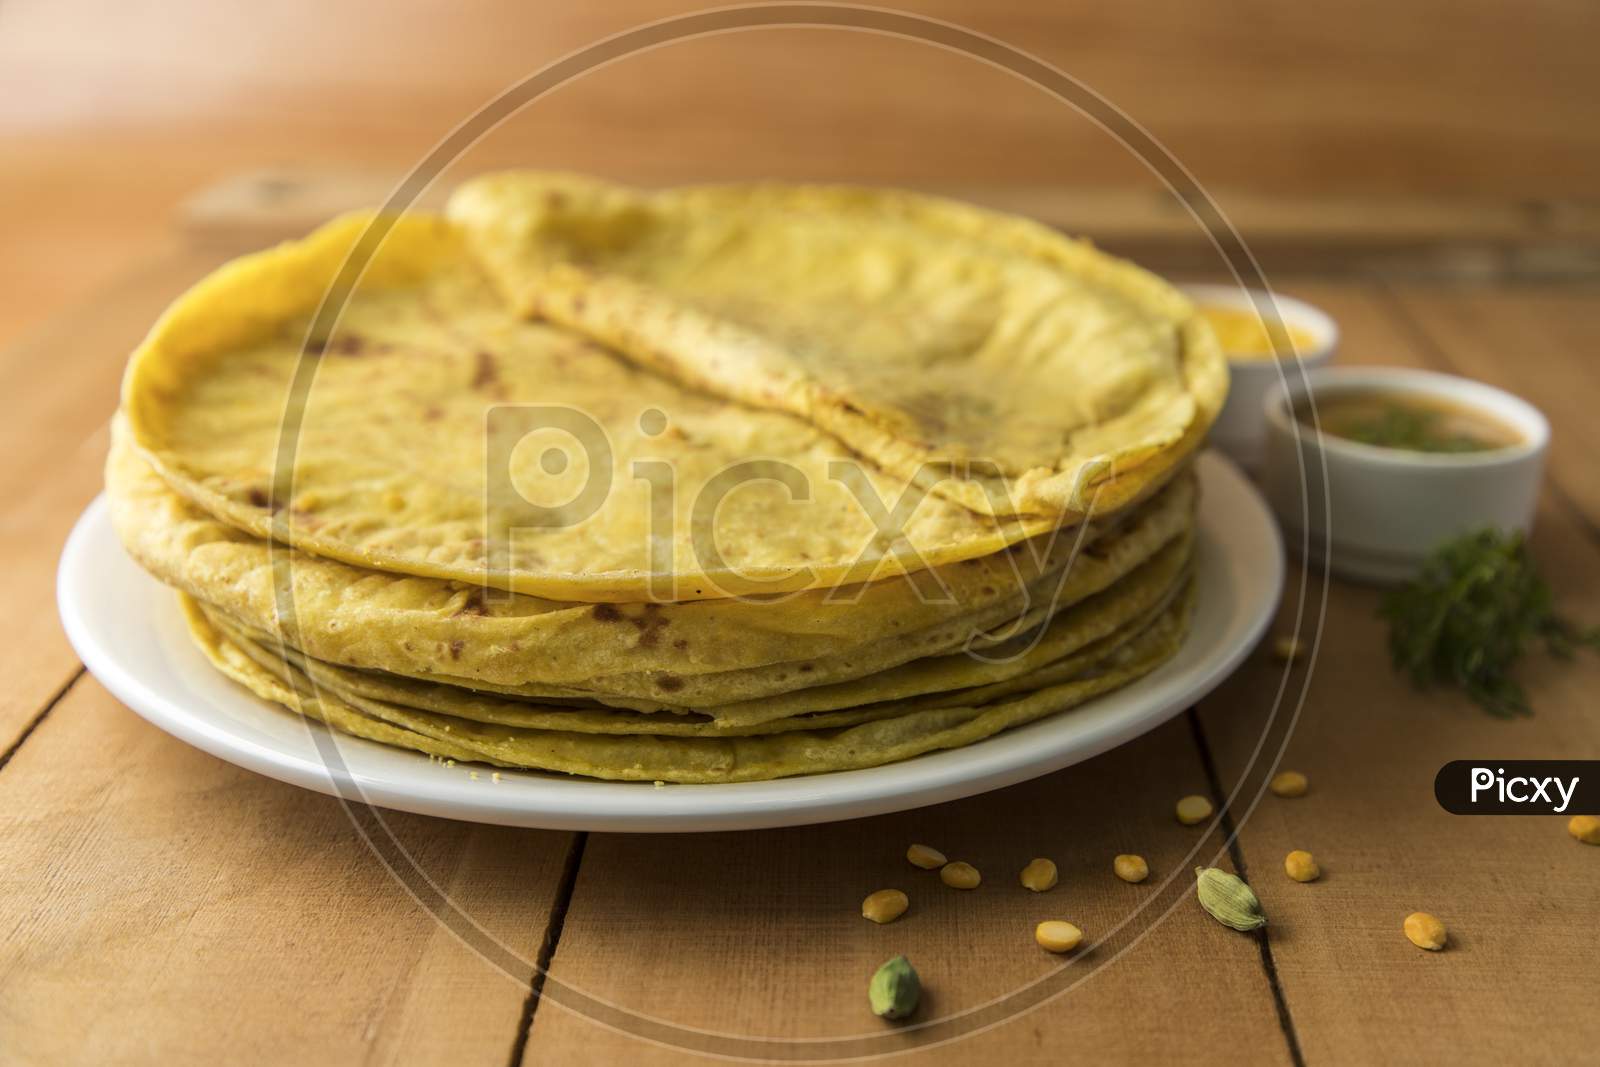 Puranpoli  A Maharashtra Dish For The Holi Festival Occasion On an Wooden Background